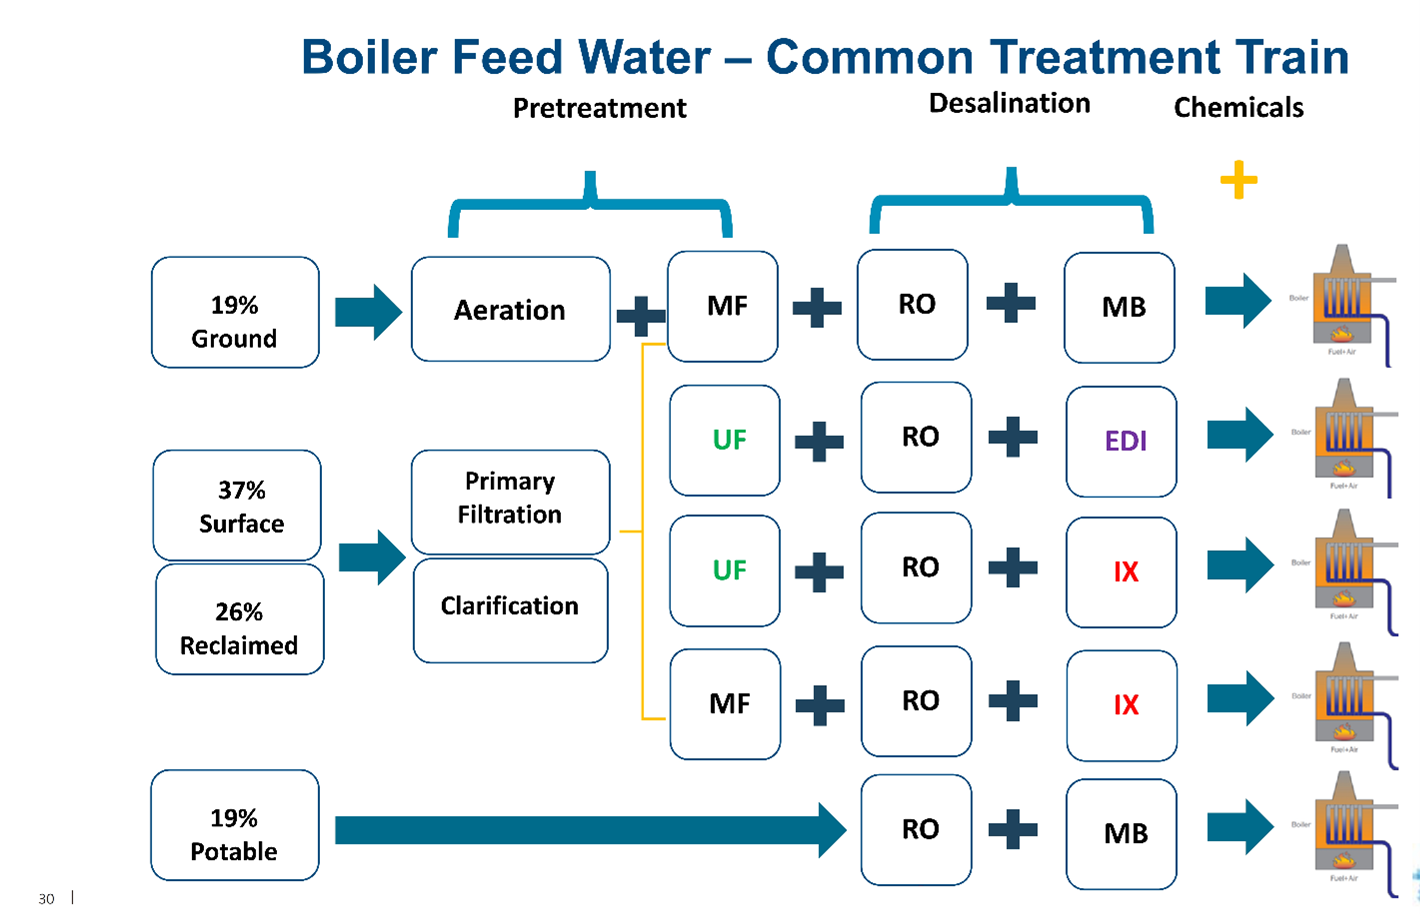 Figure 2: Typical Treatment Trains for Treatment of Boiler Feed/Makeup